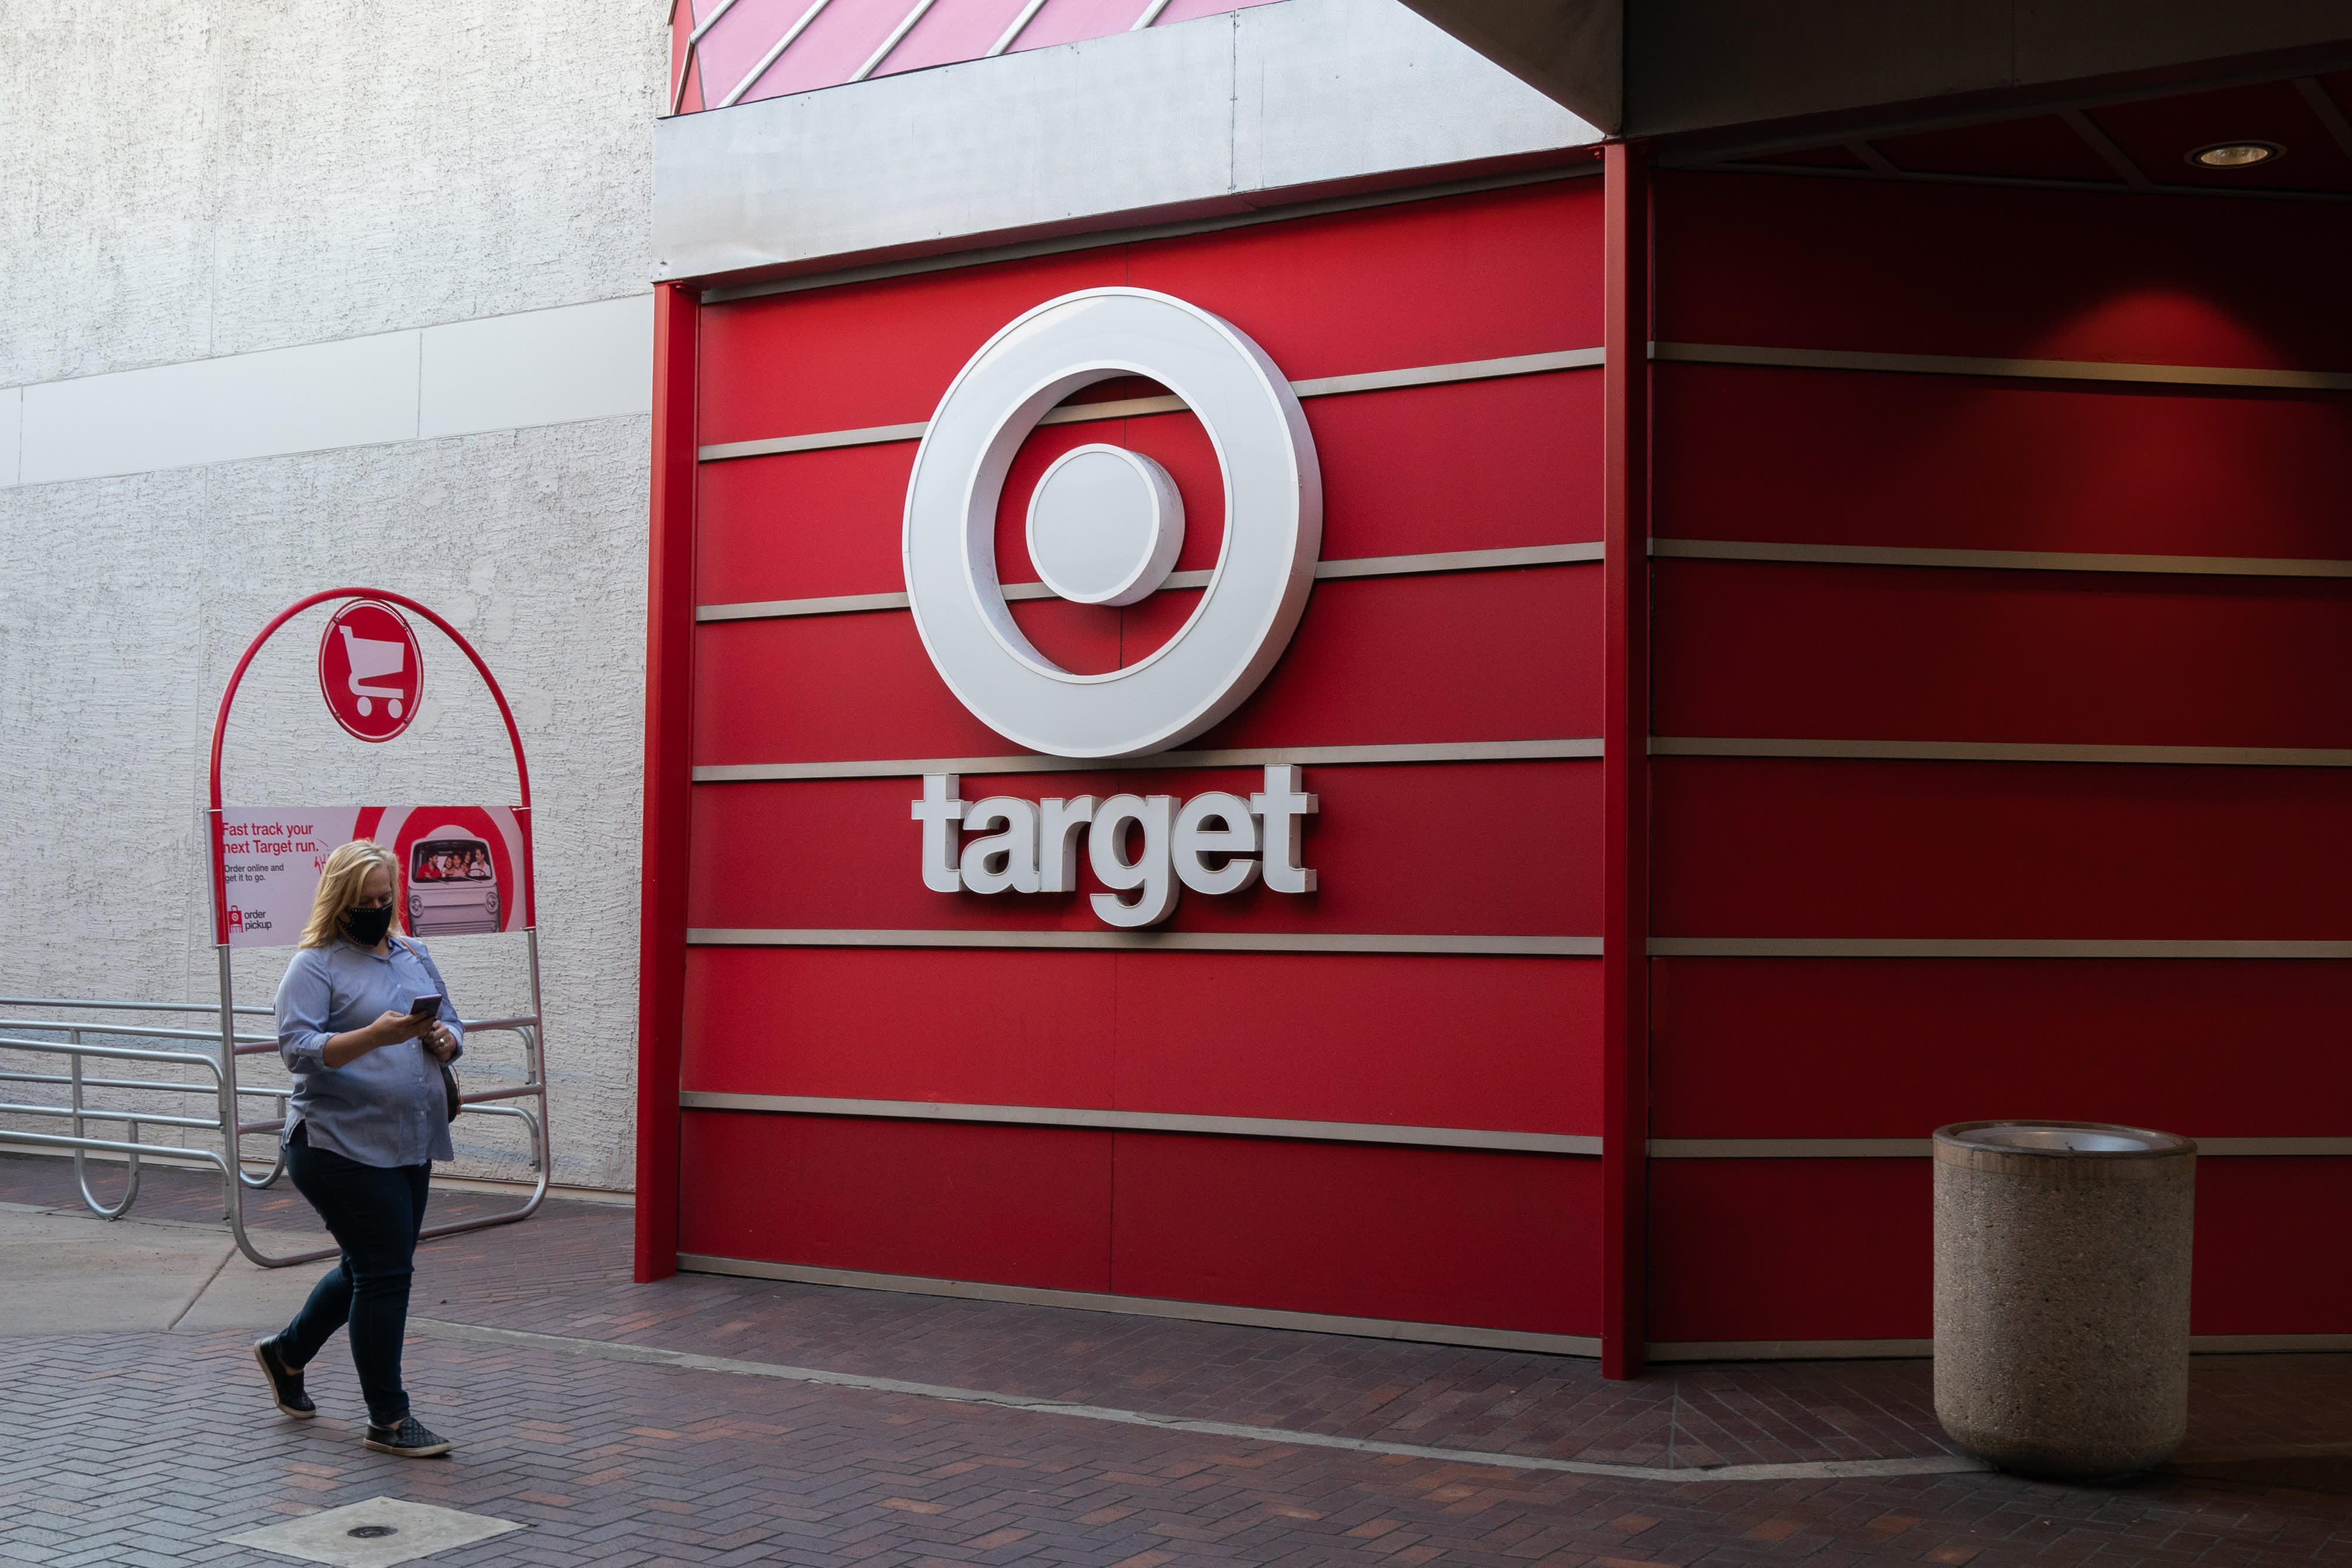 Target of investing US $ 4 billion to accelerate new stores and expand the supply chain